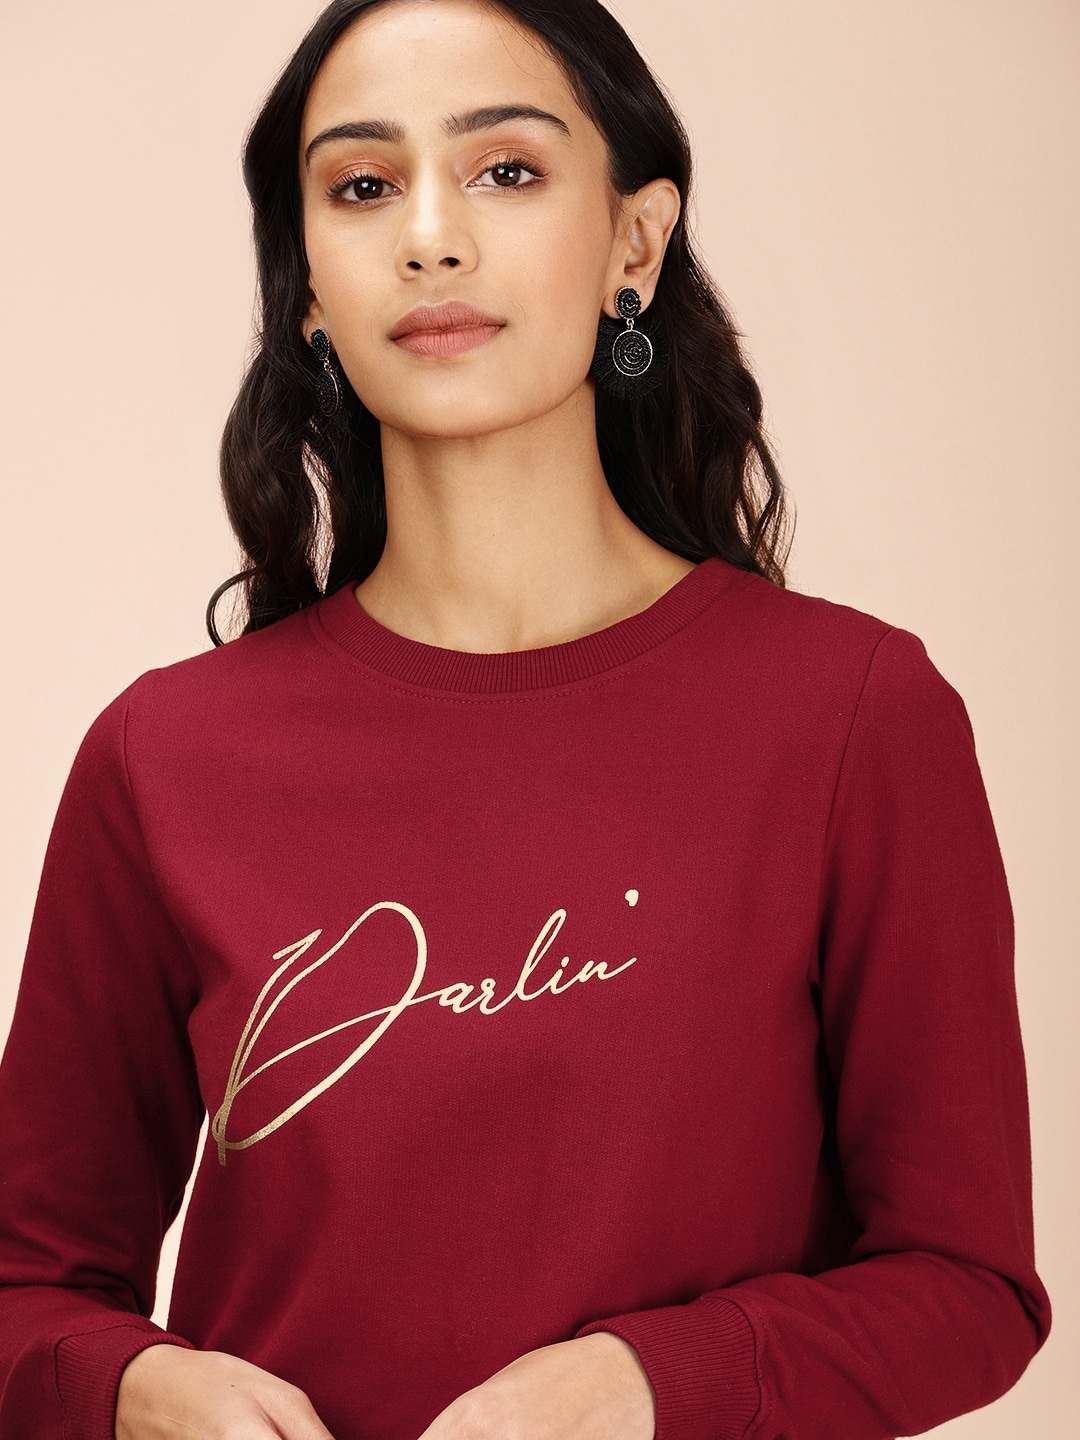 all about you Women Maroon  Gold Printed Sweatshirt Price in India